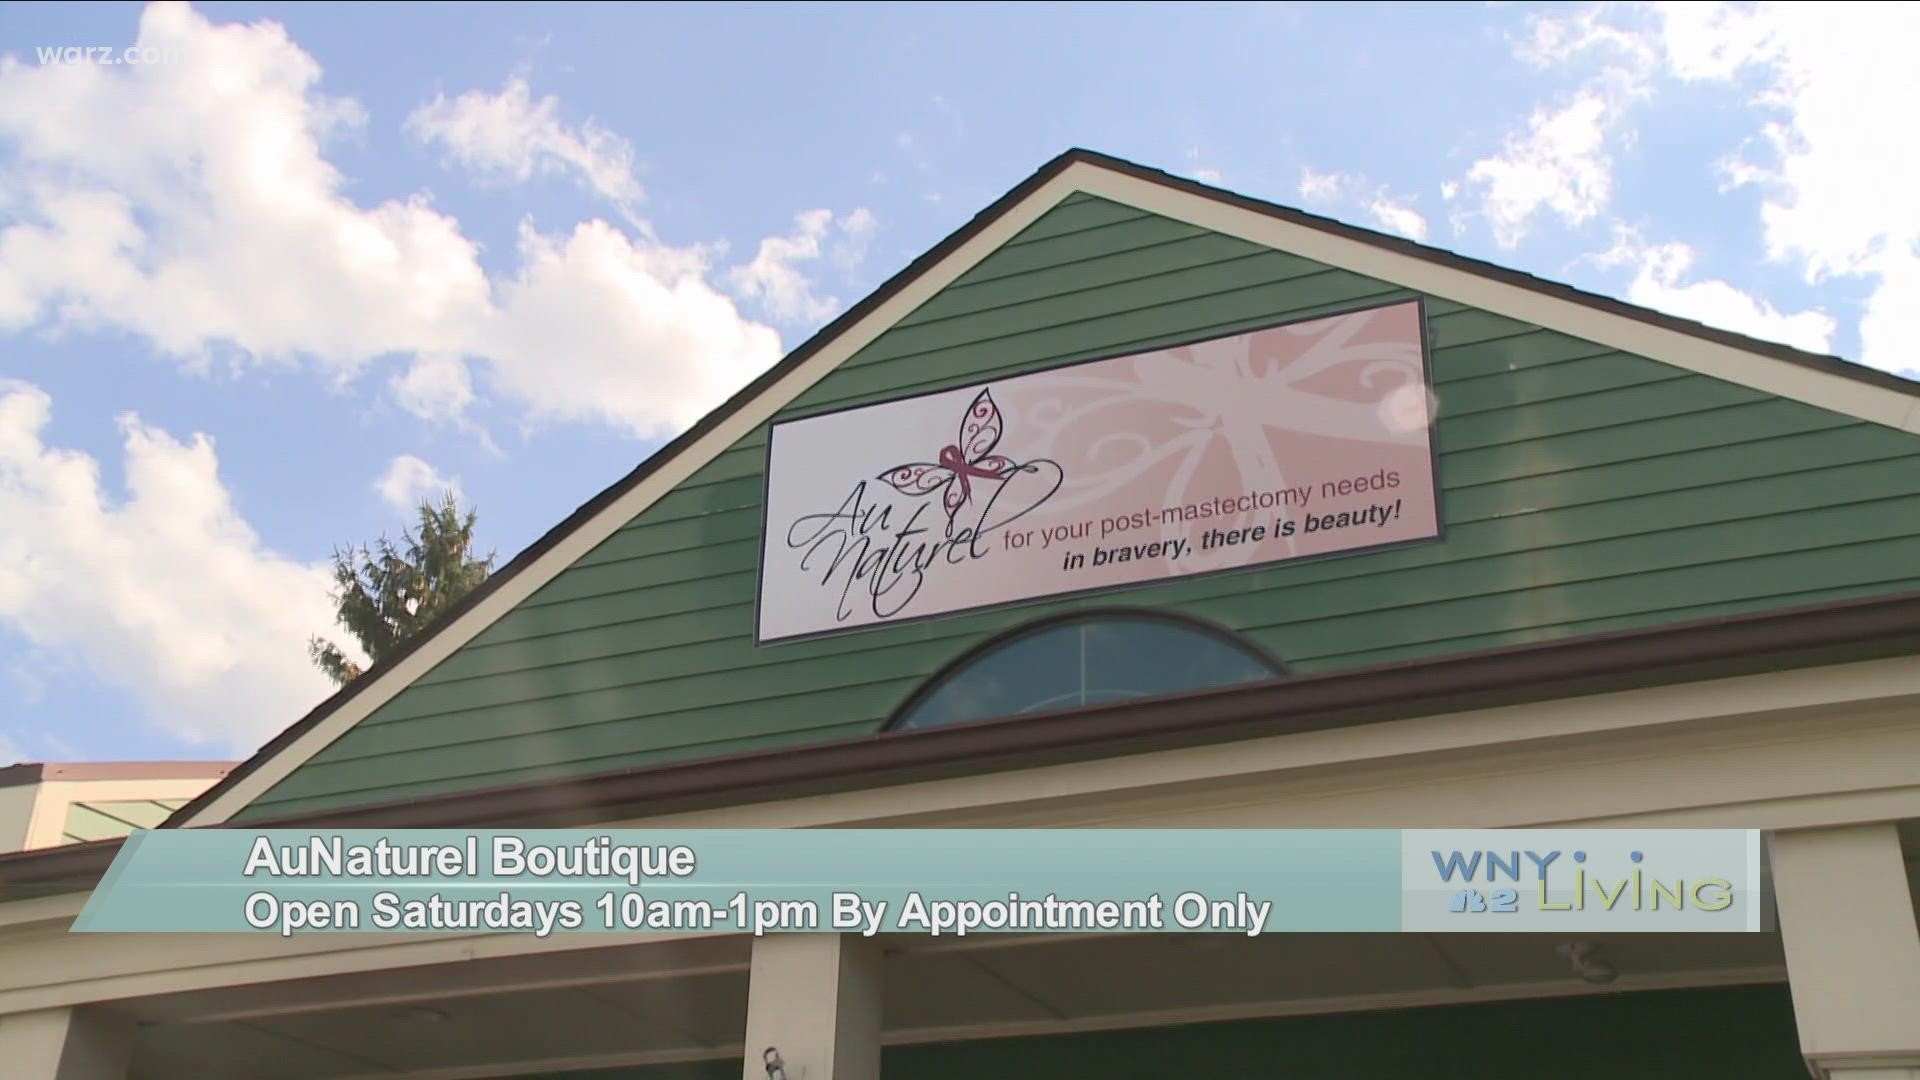 WNY Living - September 18 - AuNaturel Boutique (THIS VIDEO IS SPONSORED BY AUNATUREL BOUTIQUE)